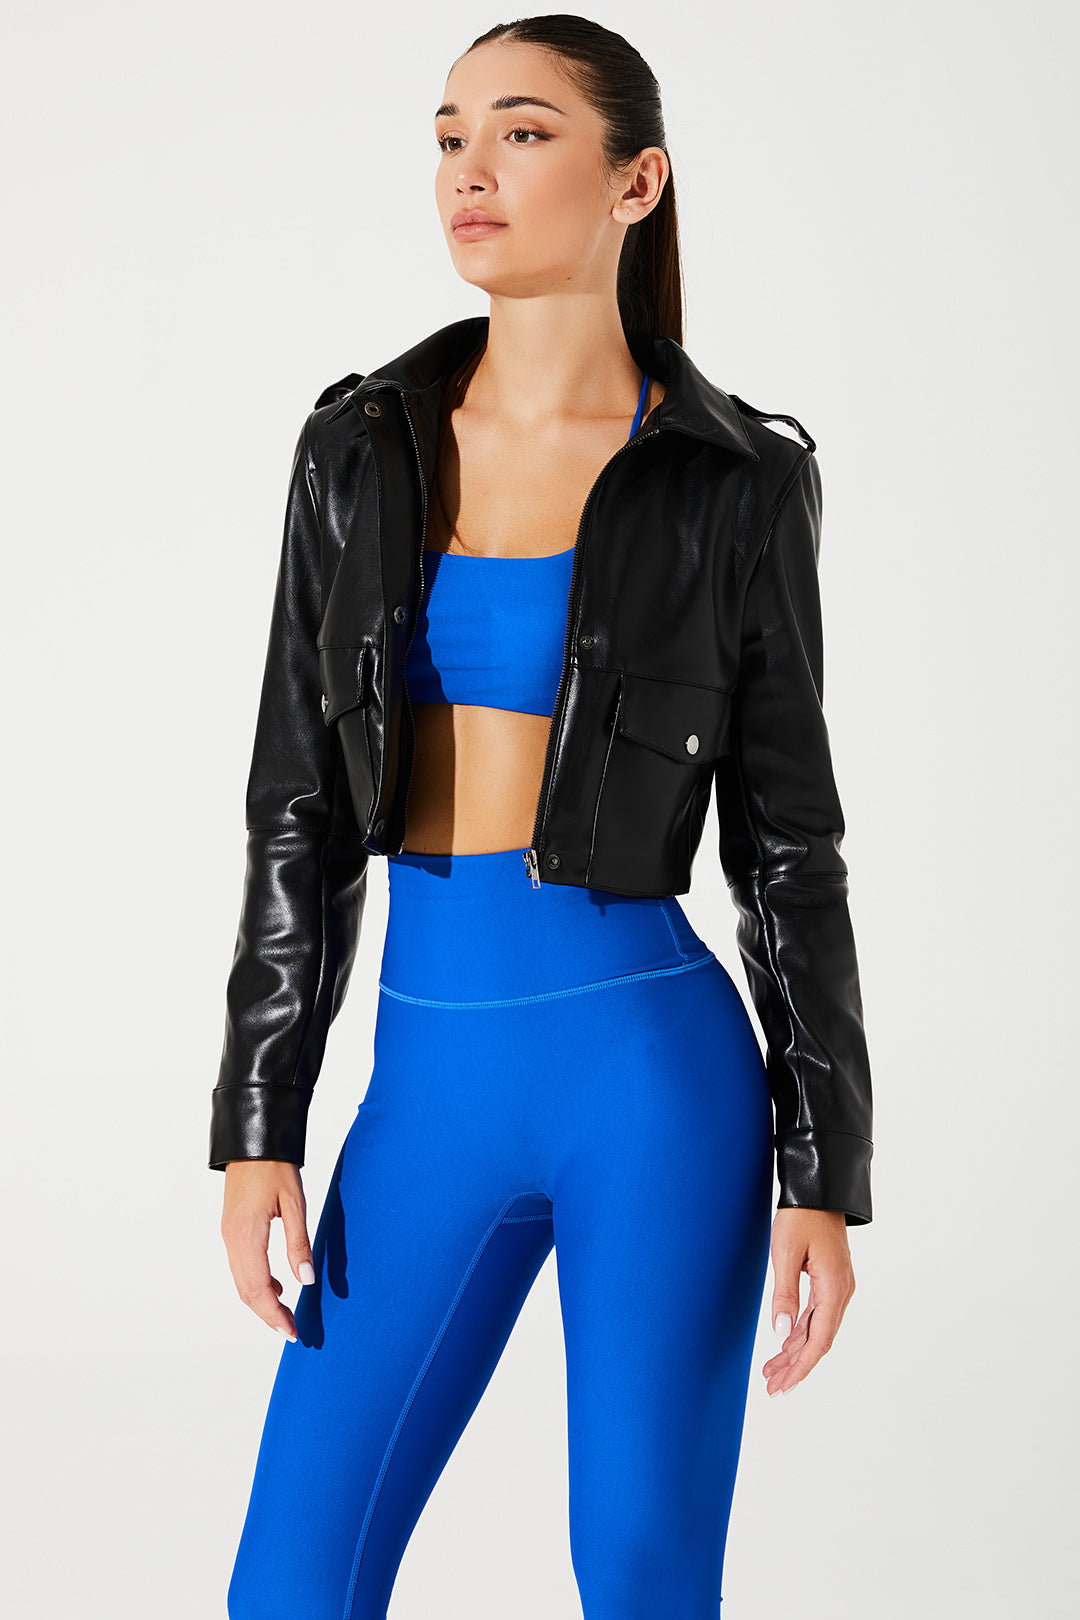 Stylish black women's urban rebel jacket, perfect for a bold and edgy fashion statement.